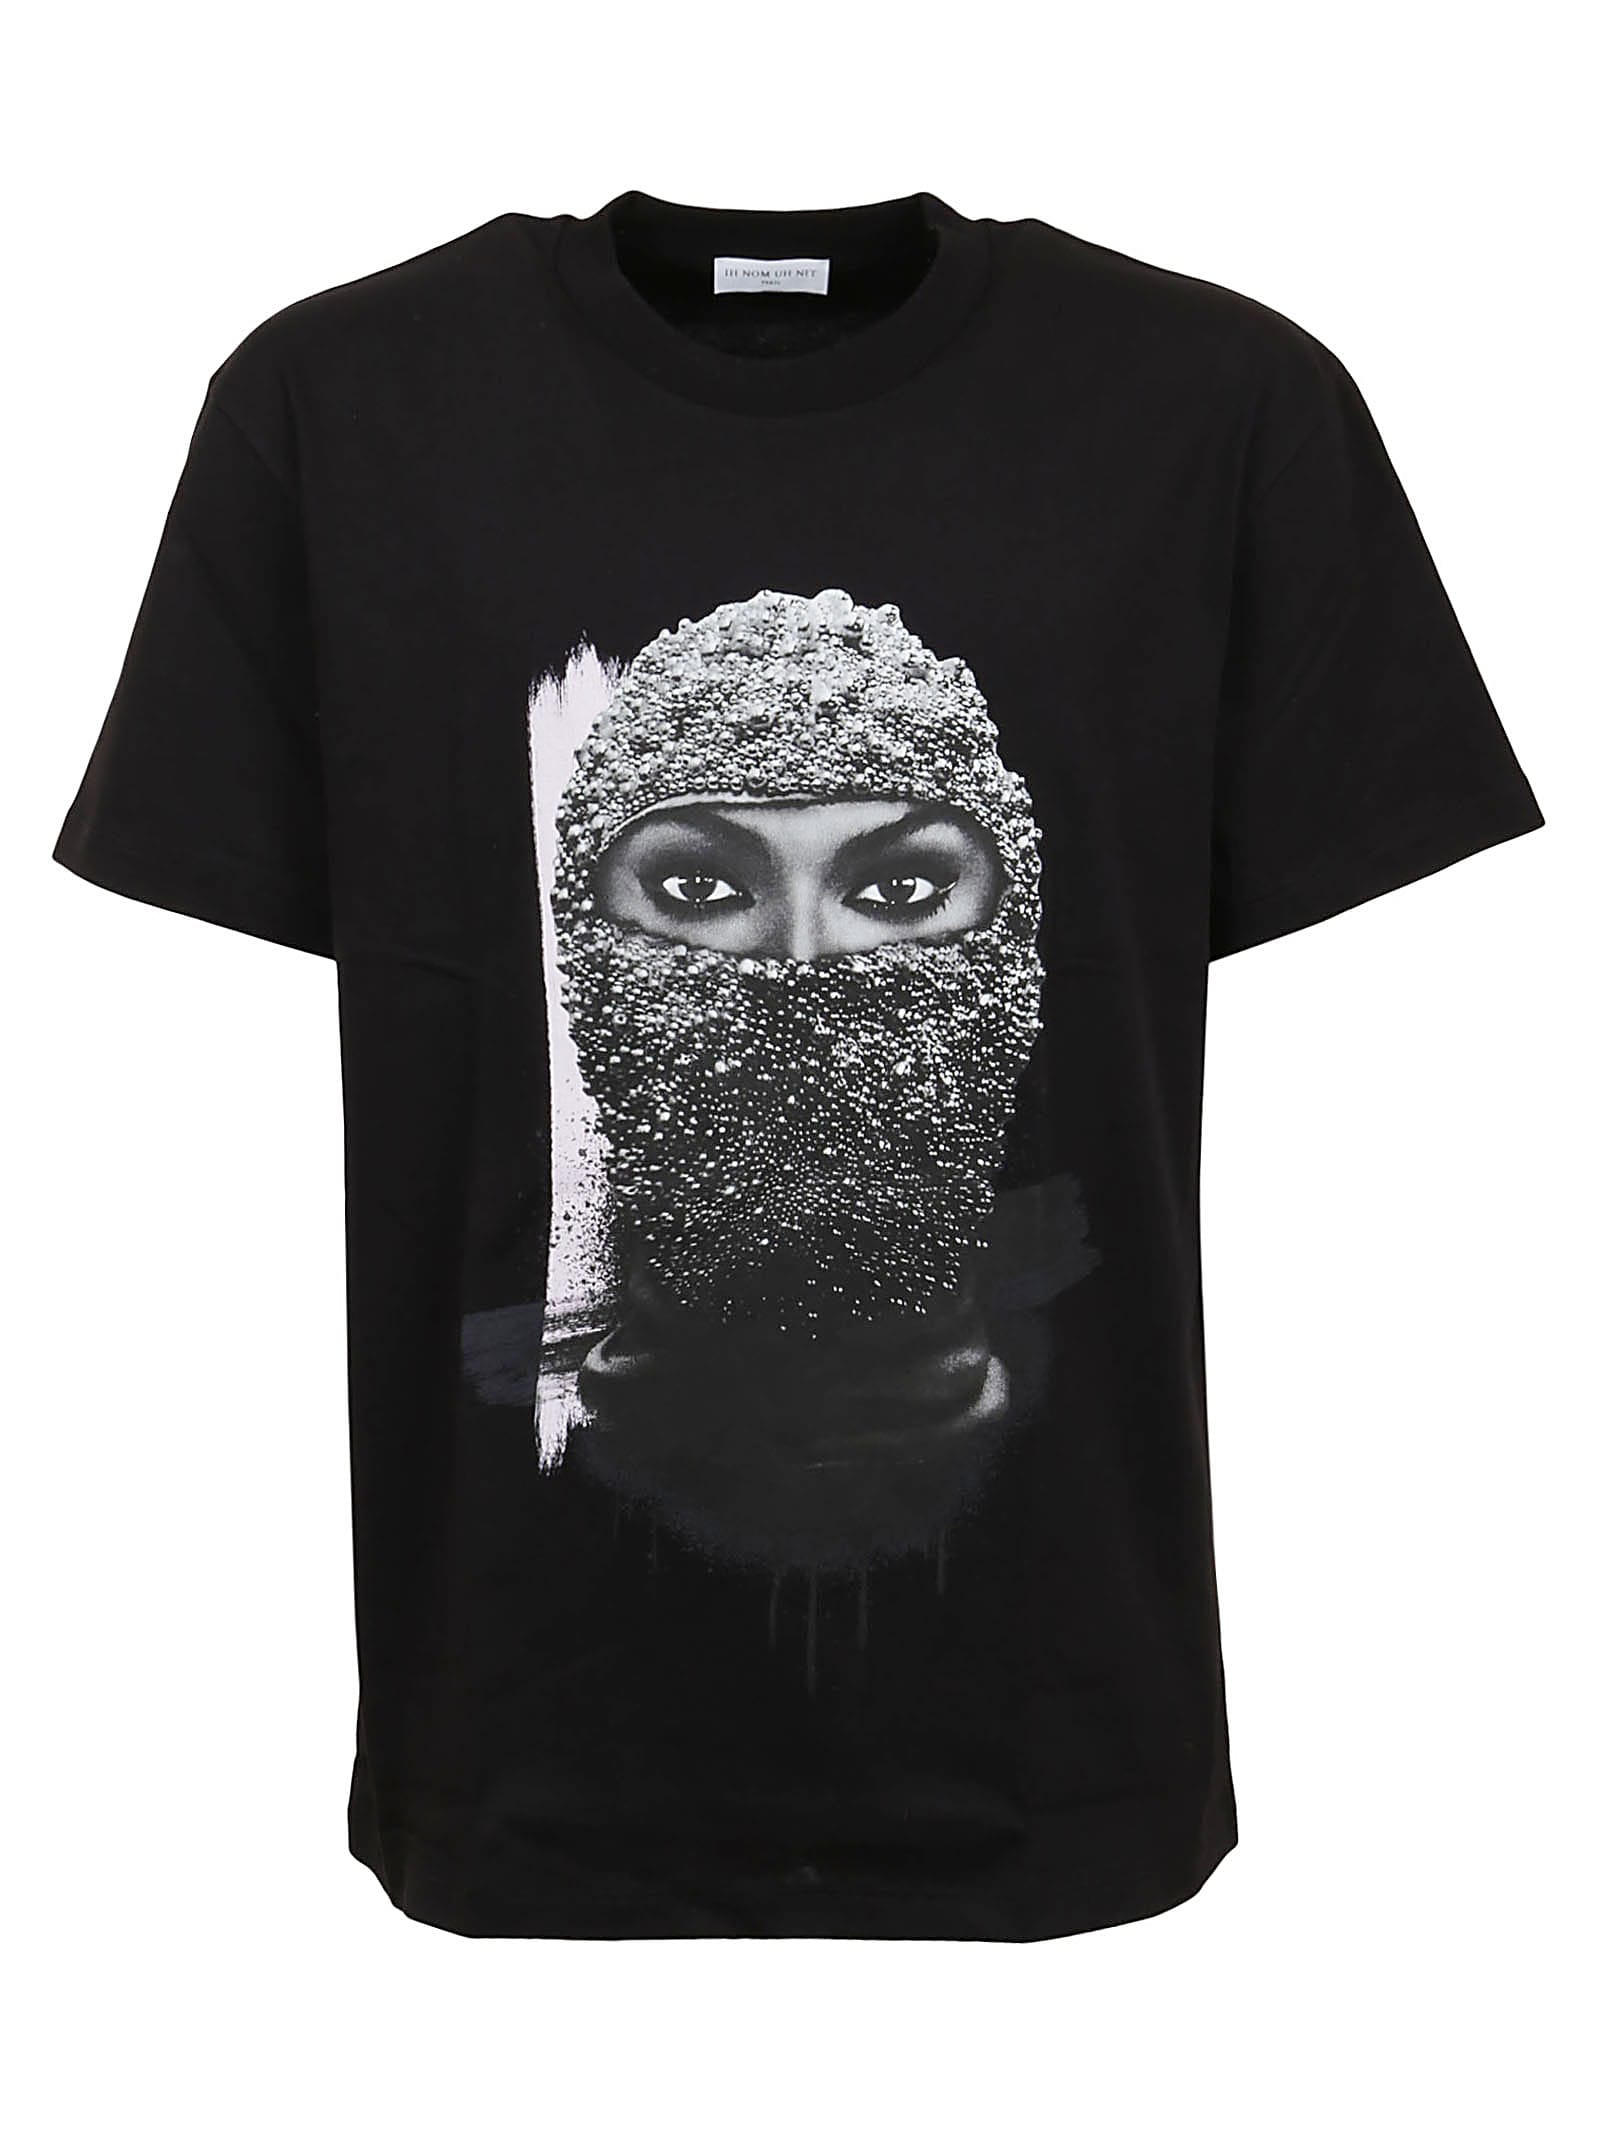 IH NOM UH NIT T-SHIRT CLASSIC FIT WITH BLACK PEARL WOMAN MASK ON FRONT,11790657